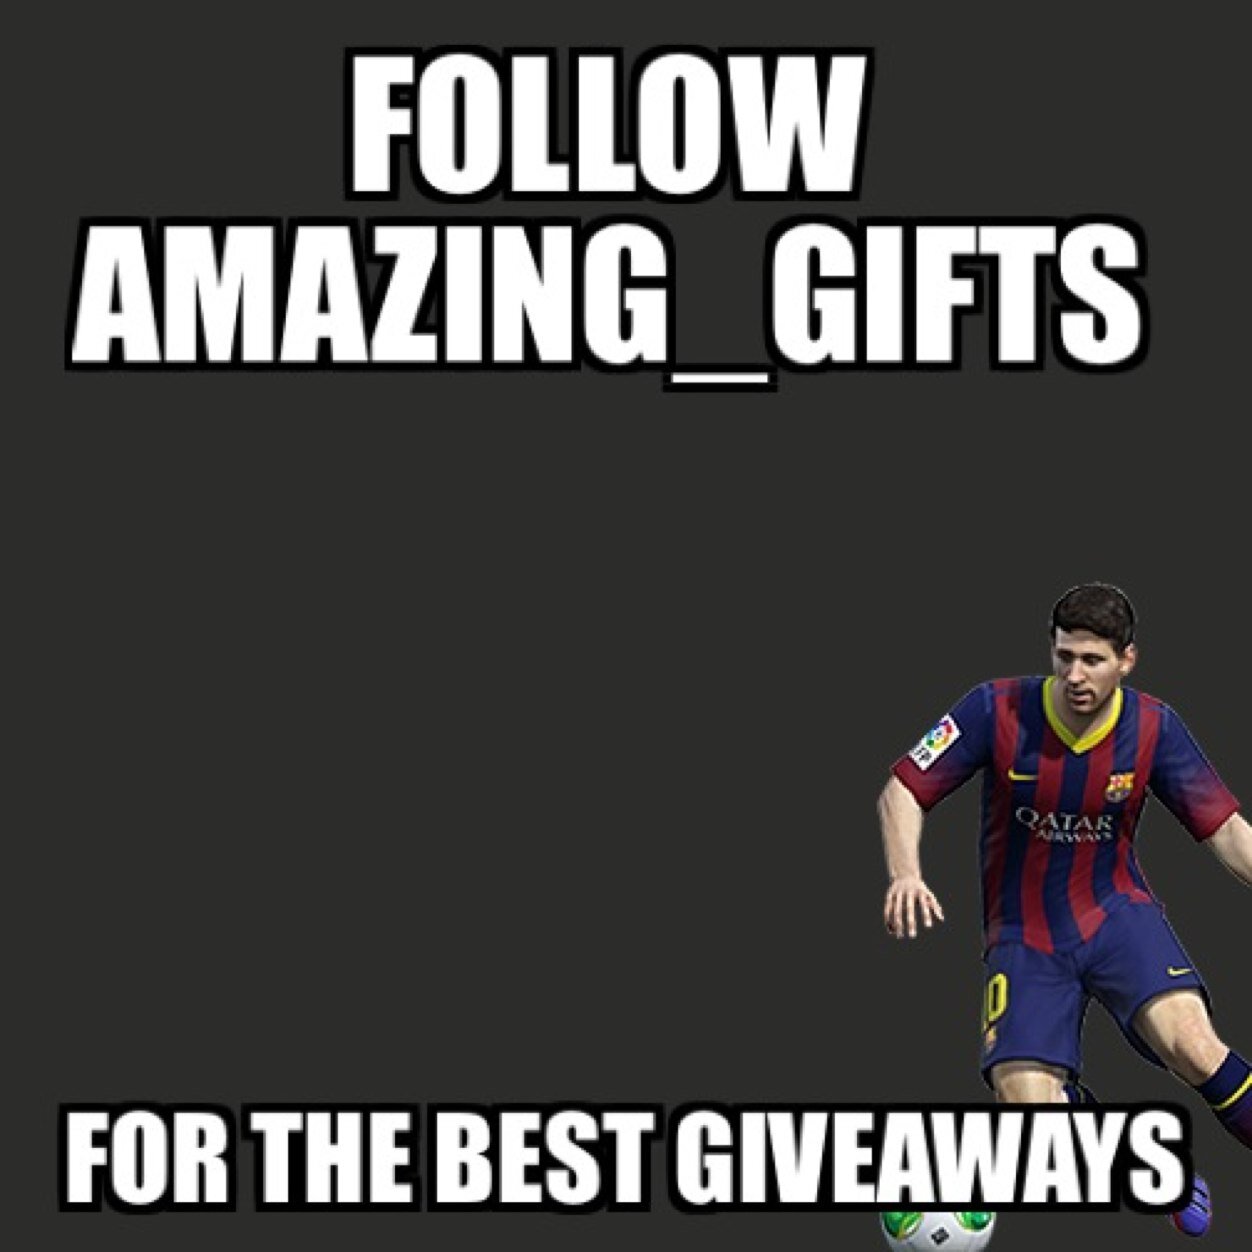 FUT 14 GIVEAWAYS (PS3) ~ FOLLOW, RETWEET AND PROMOTE TO WIN AMAZING PRICES! ~ Waggers ~ Pinkslip ~ Wager stats 12 - 0 - 0 Profit 120k